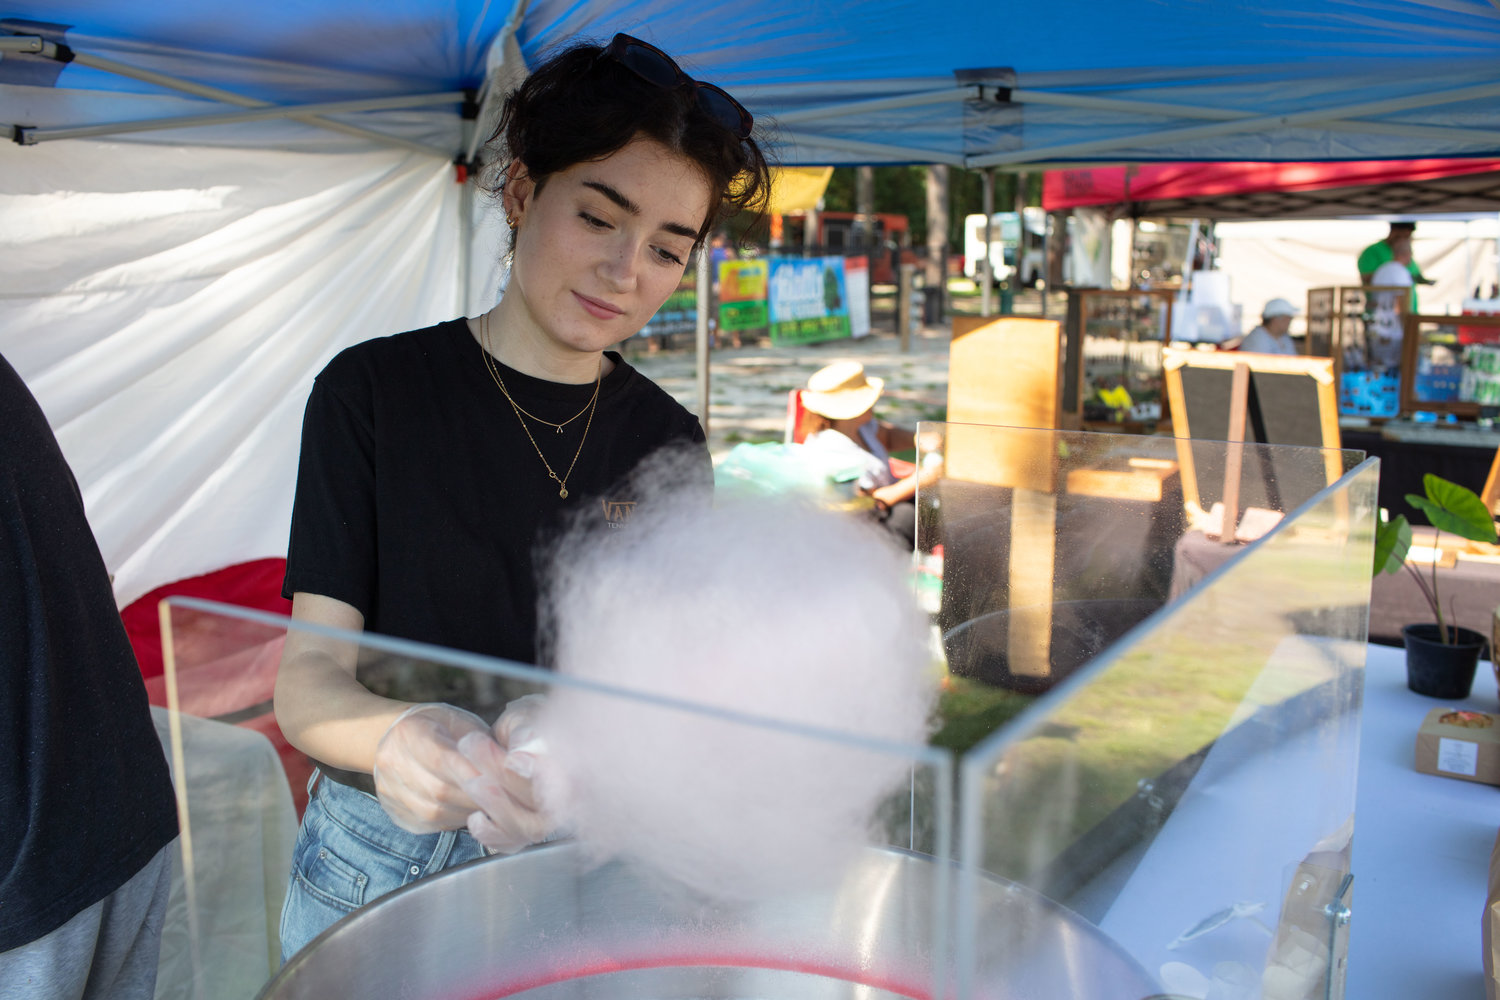 Kaya Gordon prepares some cotton candy at her business' stand named Munchies.